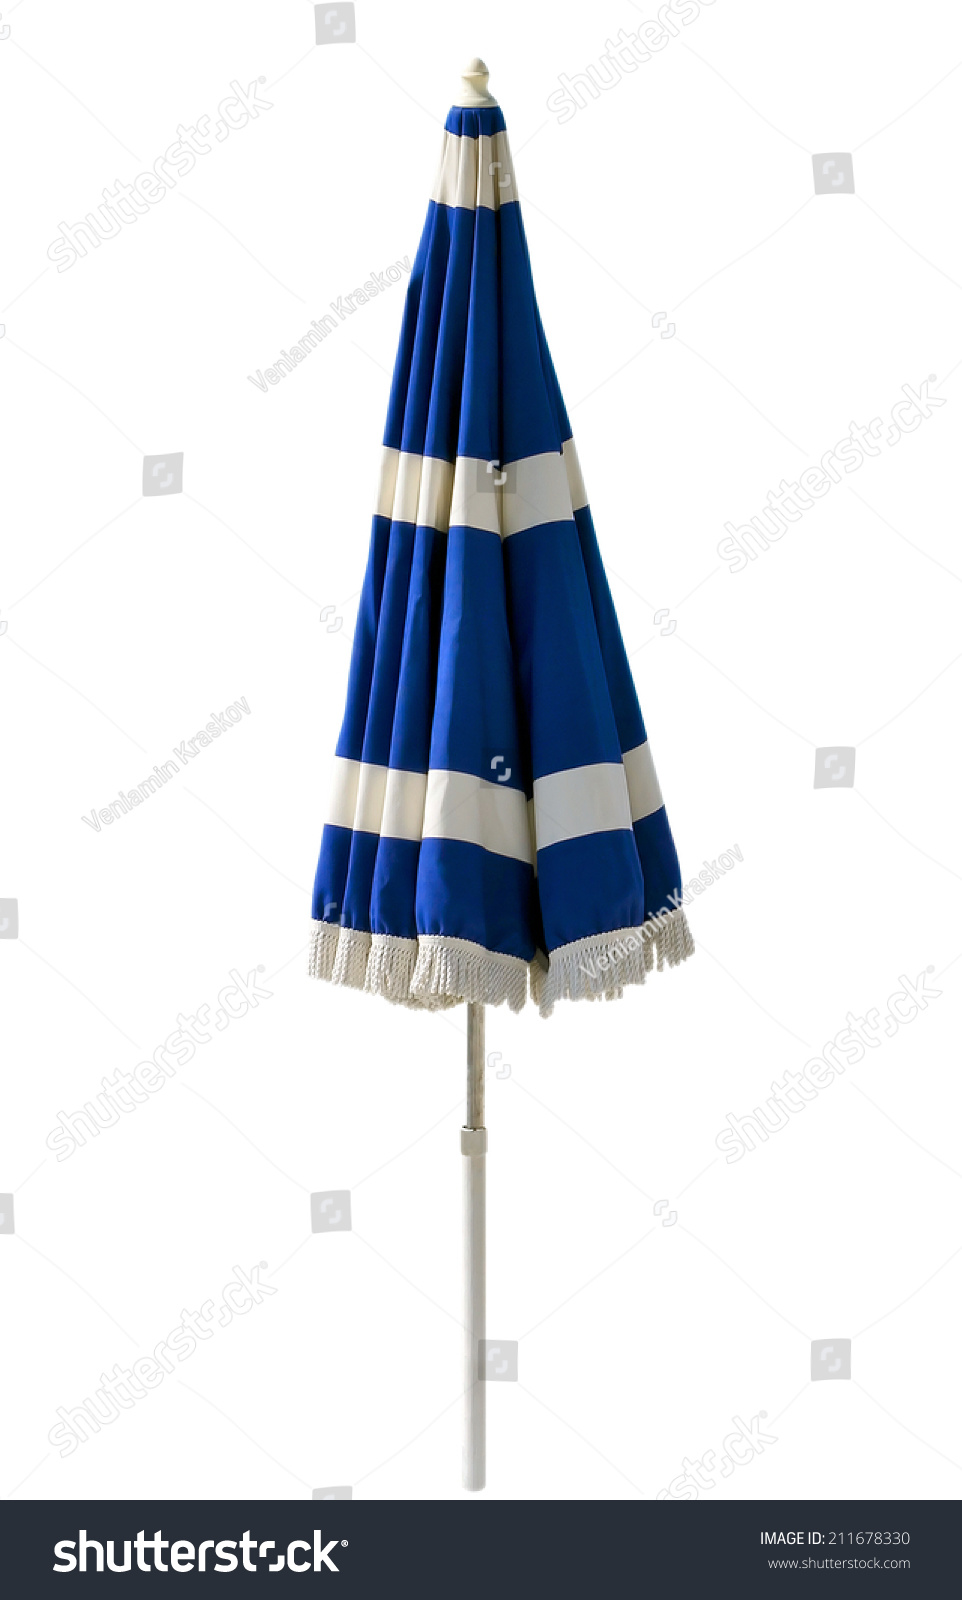 Blue beach umbrella isolated on white. Clipping path included. #211678330